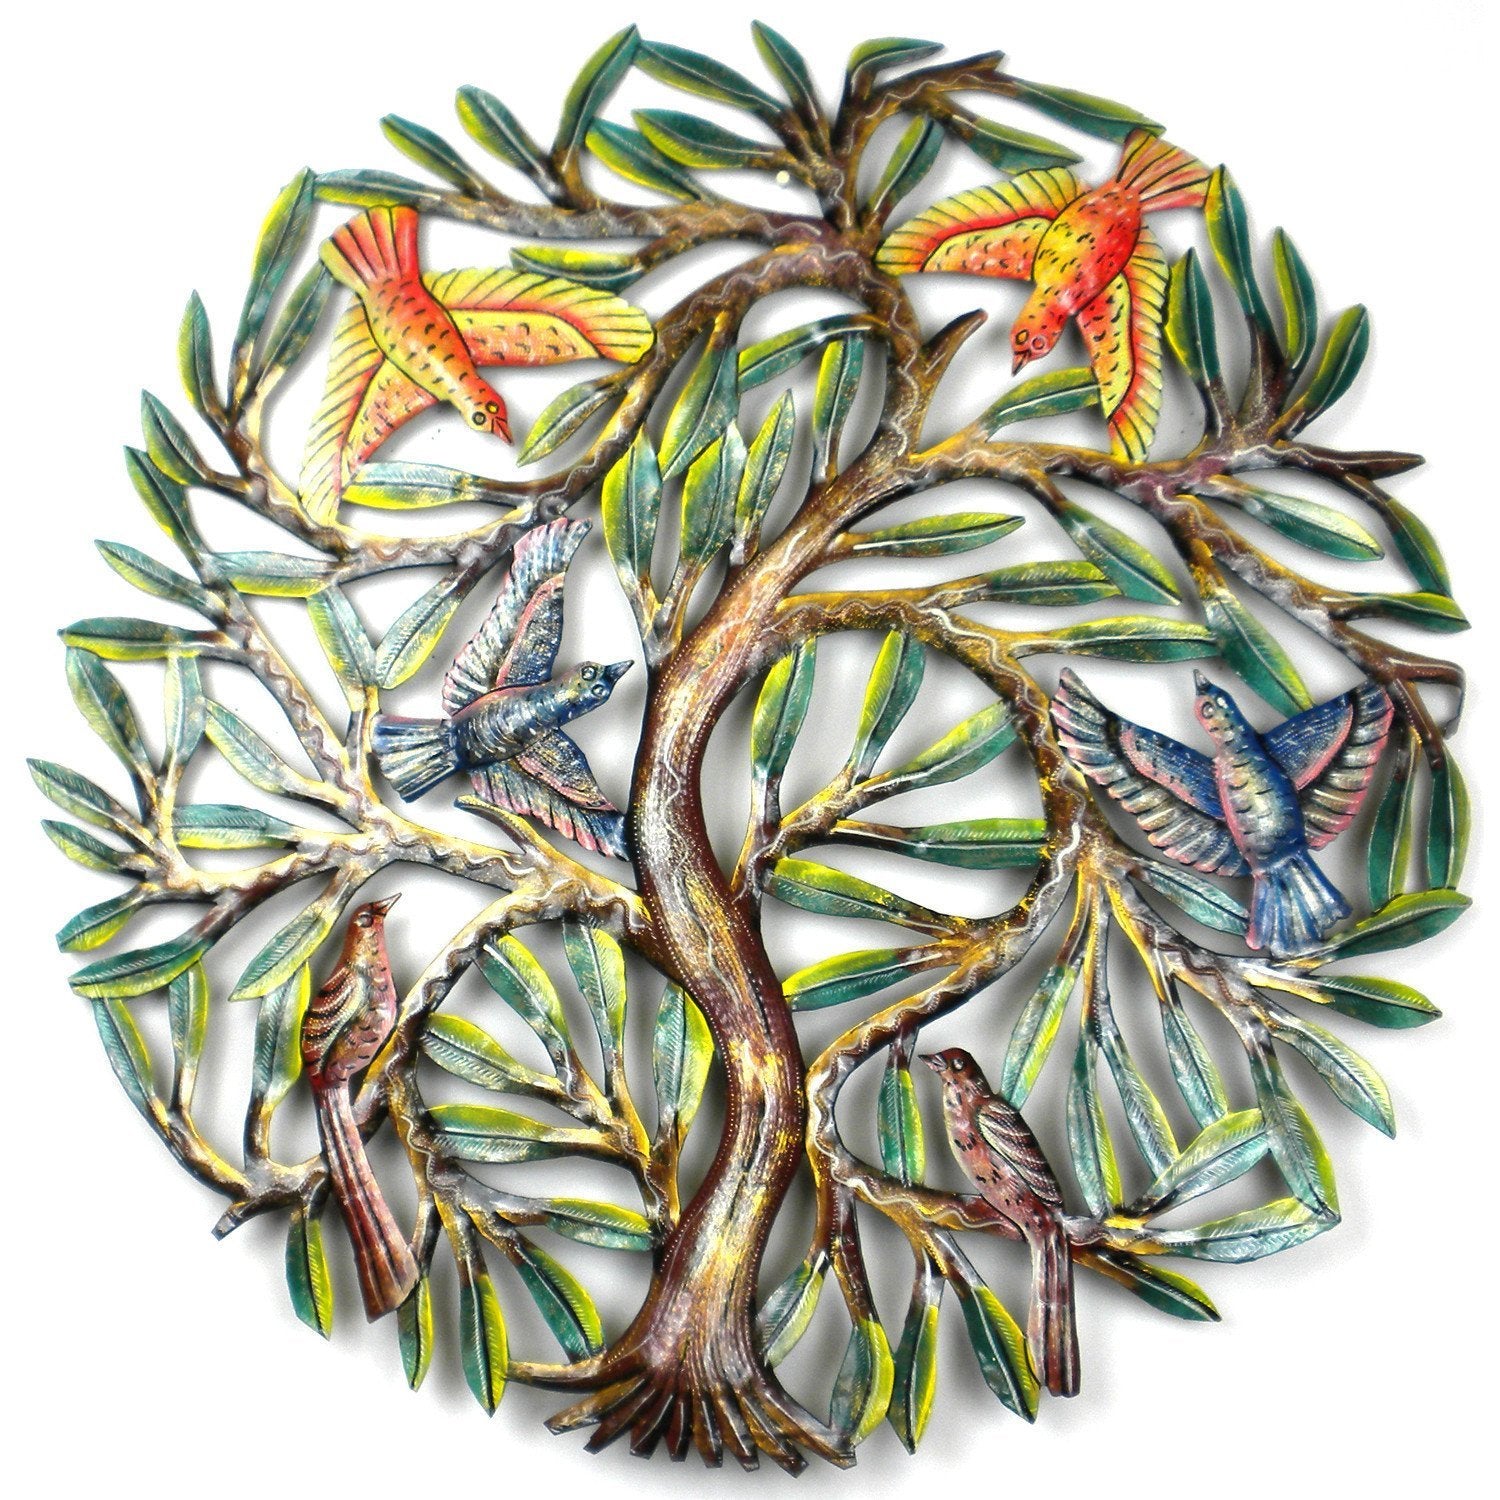 Painted Tree with Birds Steel Drum Wall Art, 24" - Croix des Bouquets - Linda Kay Gifford’s - Those Nasty Women TALK! by SWEETSurvivor